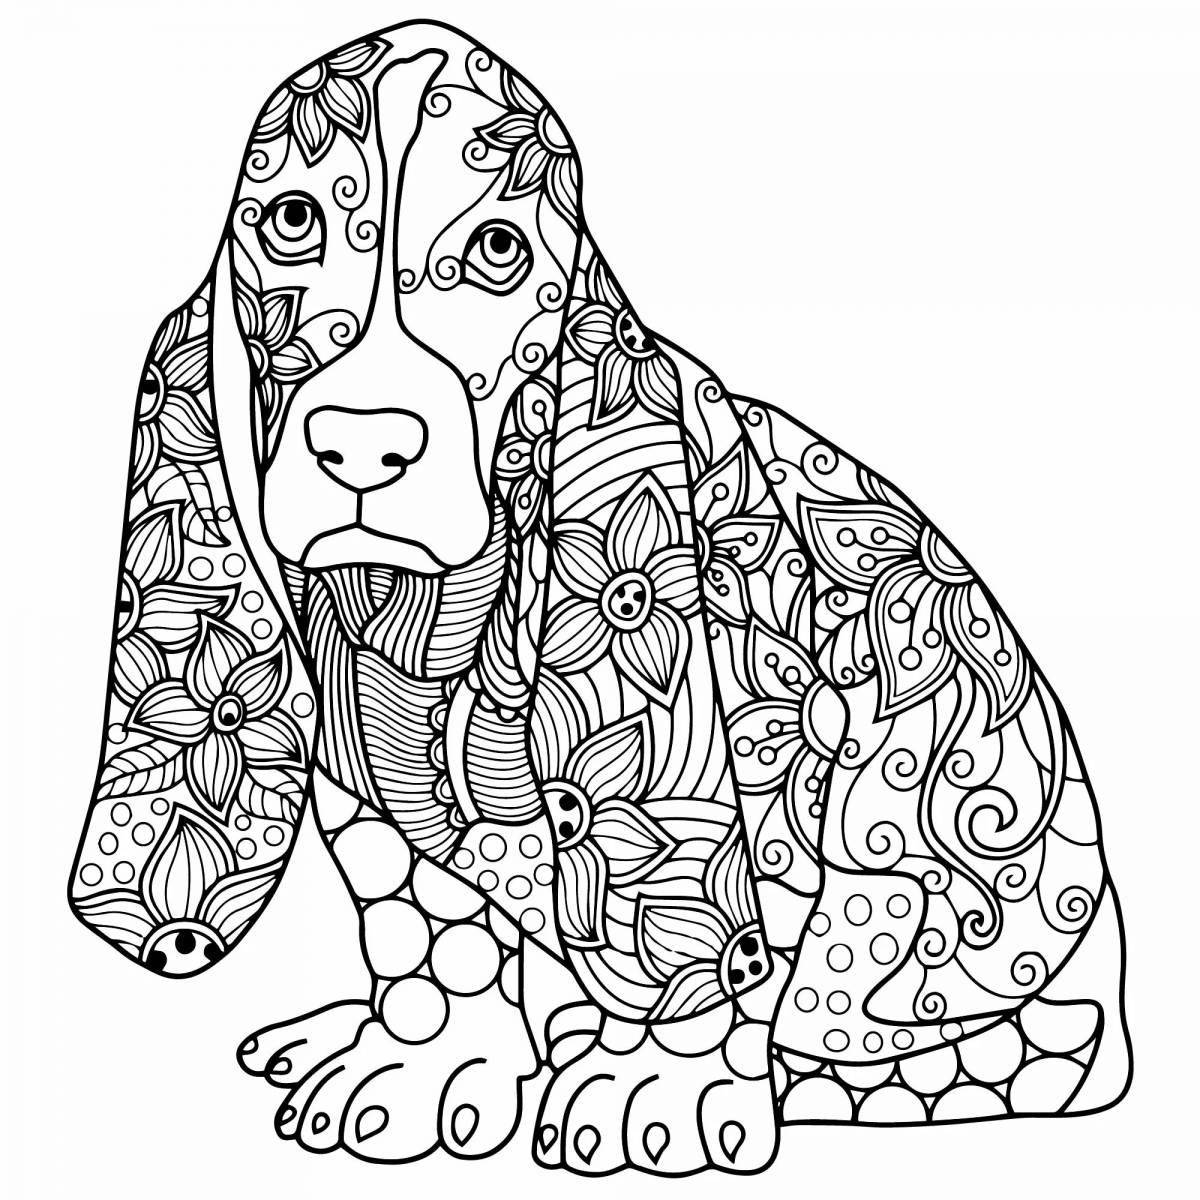 The world's best majestic coloring book